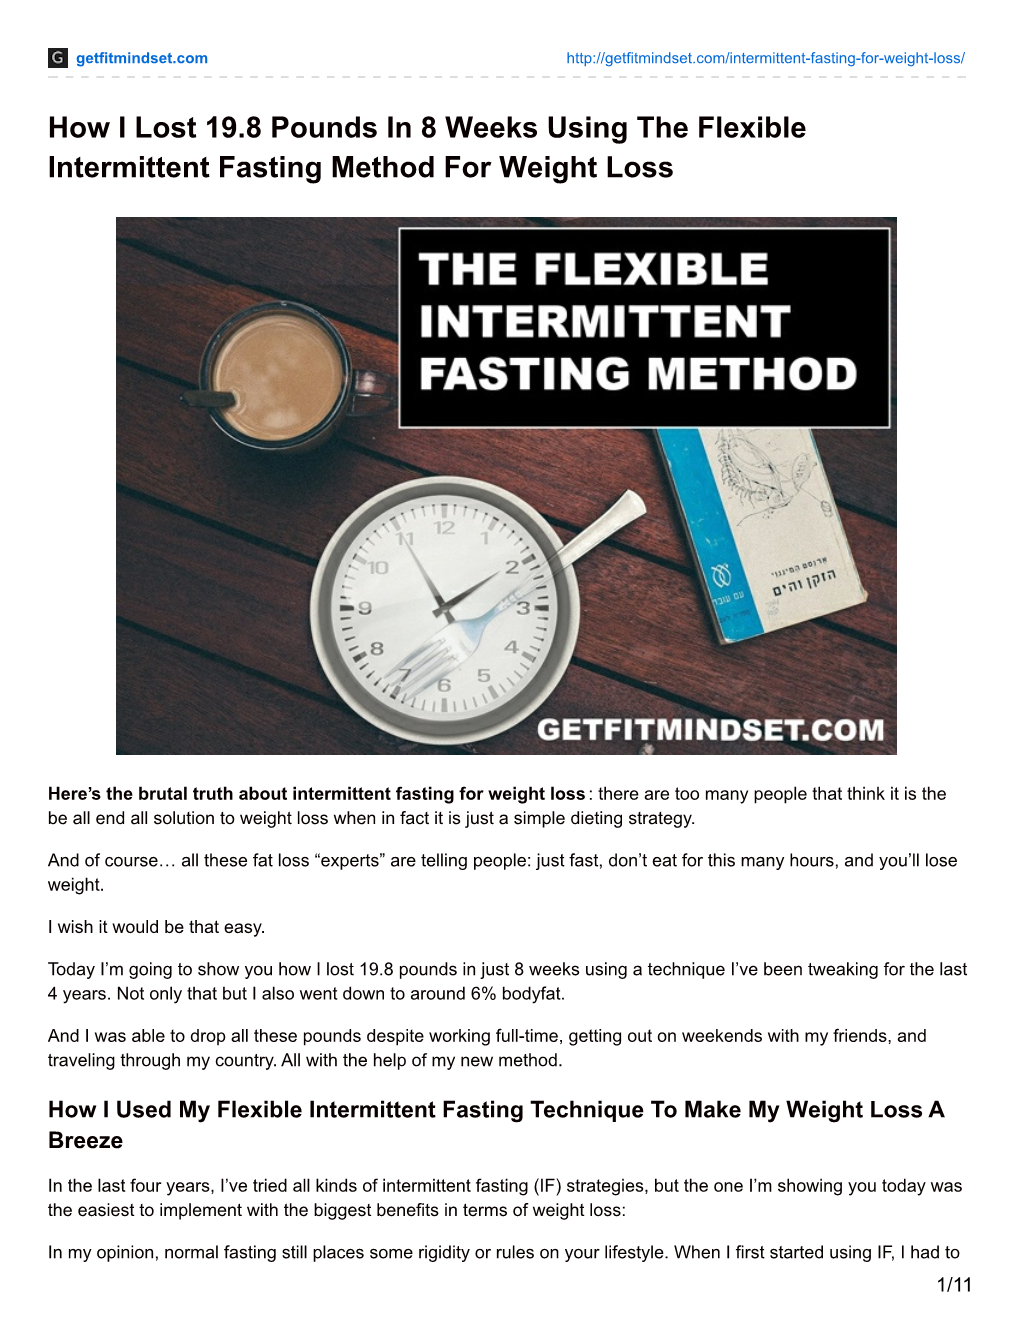 How I Lost 19.8 Pounds in 8 Weeks Using the Flexible Intermittent Fasting Method for Weight Loss